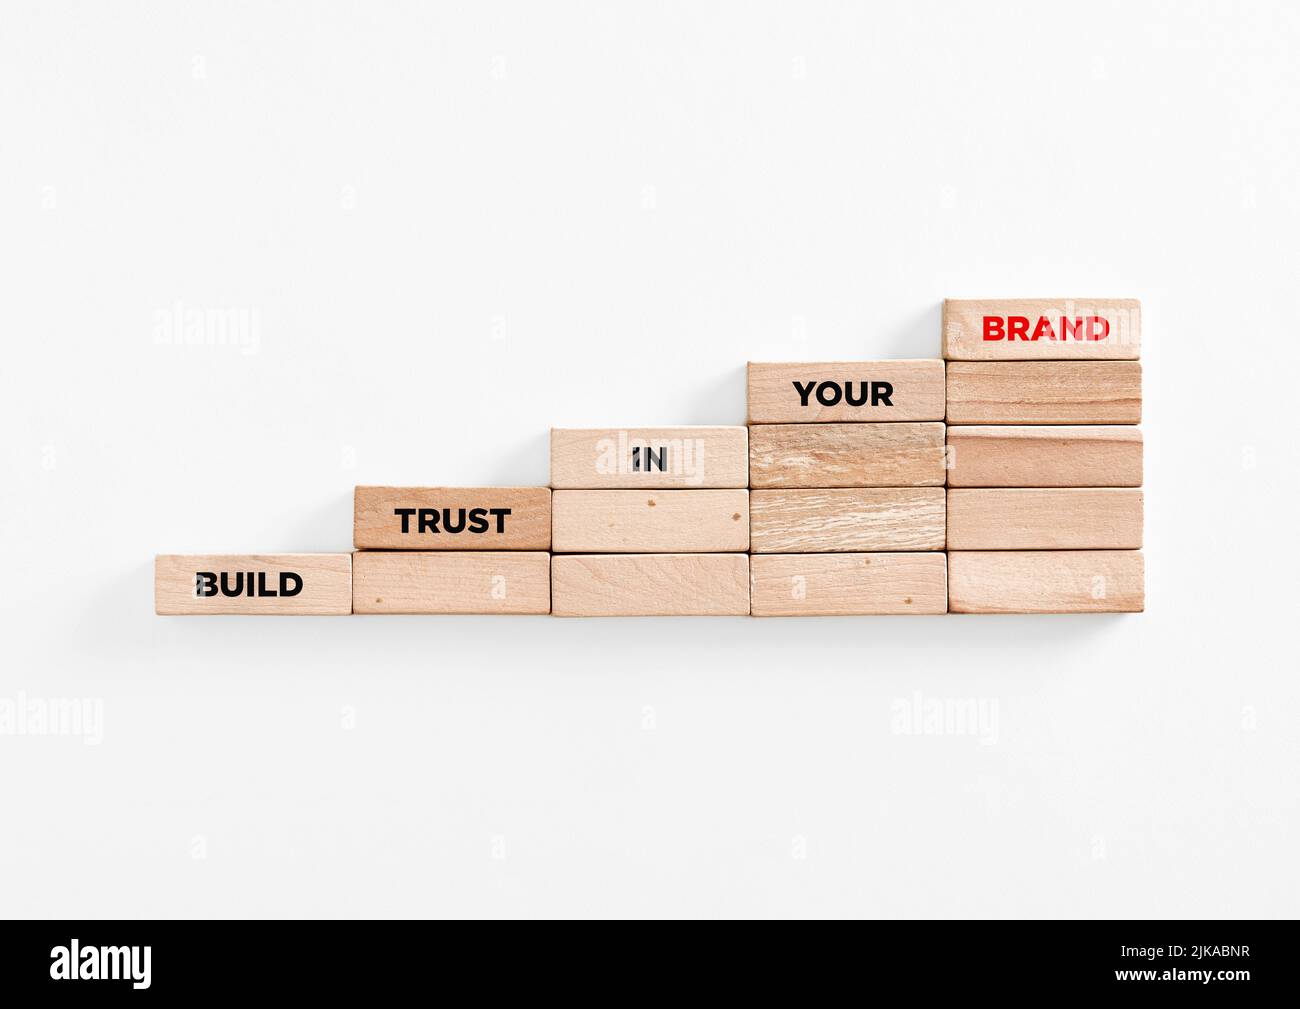 The message build trust in your brand on wooden block ladder. Business successful marketing, branding and customer brand awareness concept. Stock Photo